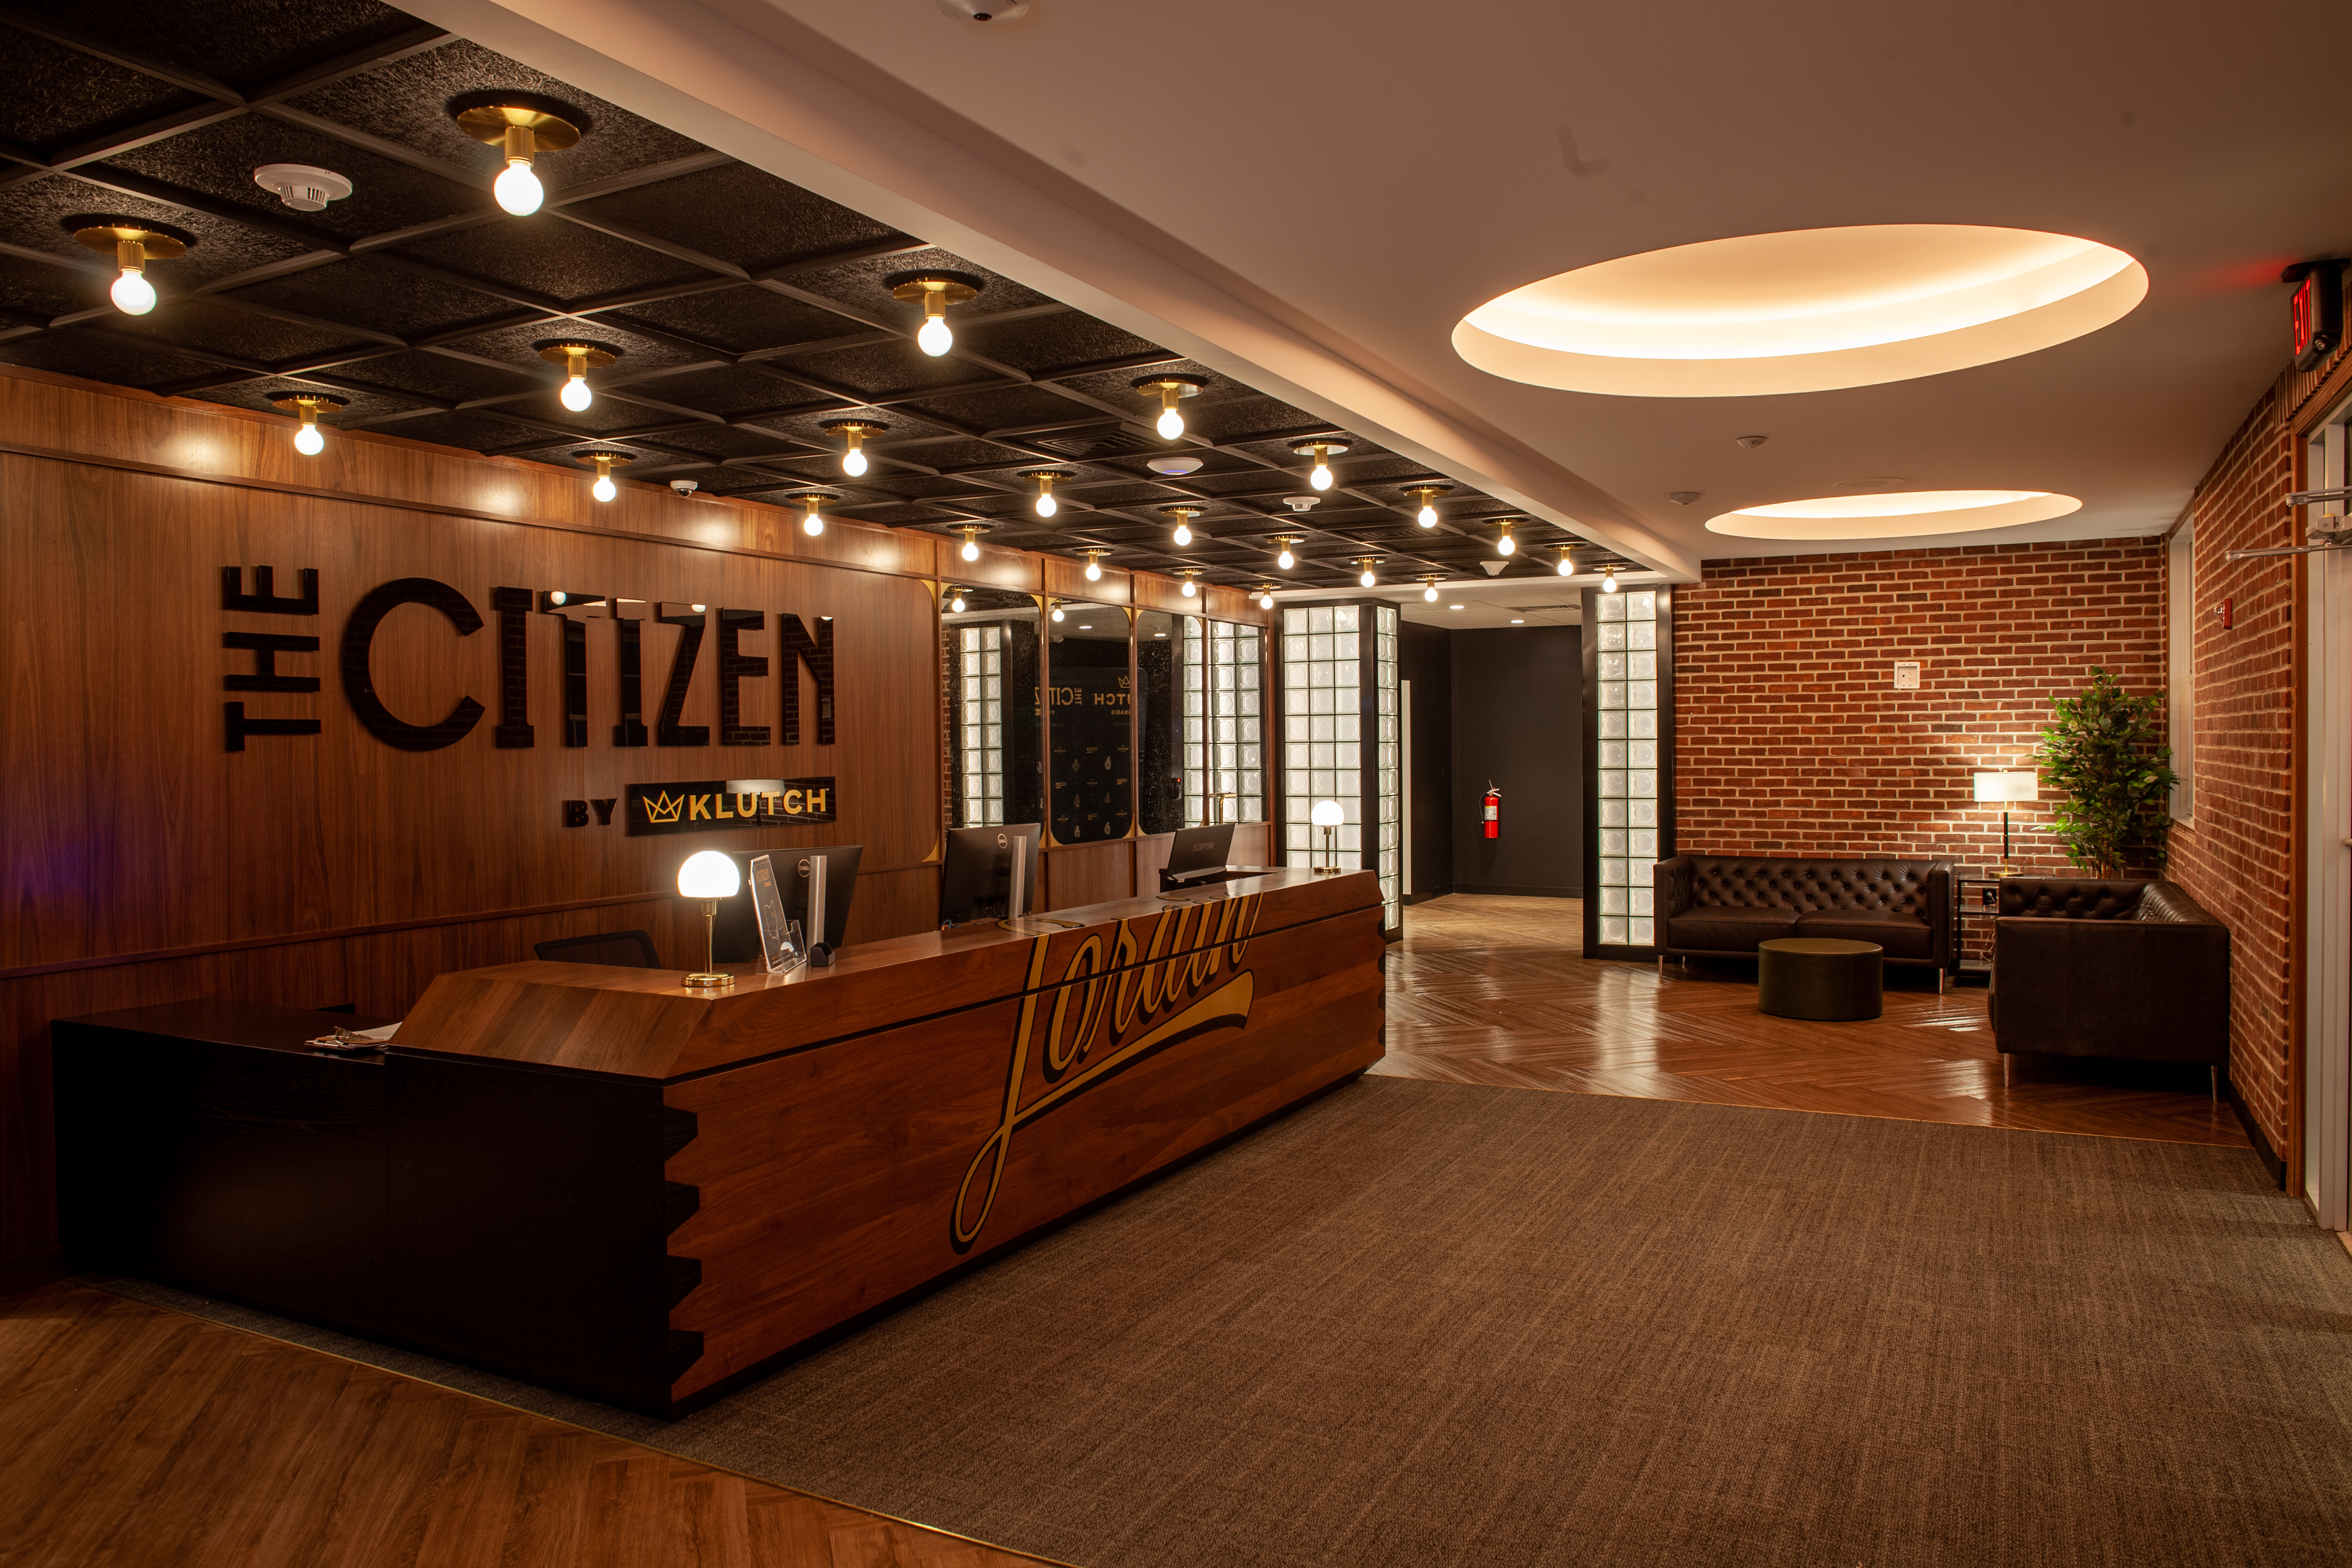 The Citizen By Klutch - Lorain | Lorain, OH Dispensary | Leafly